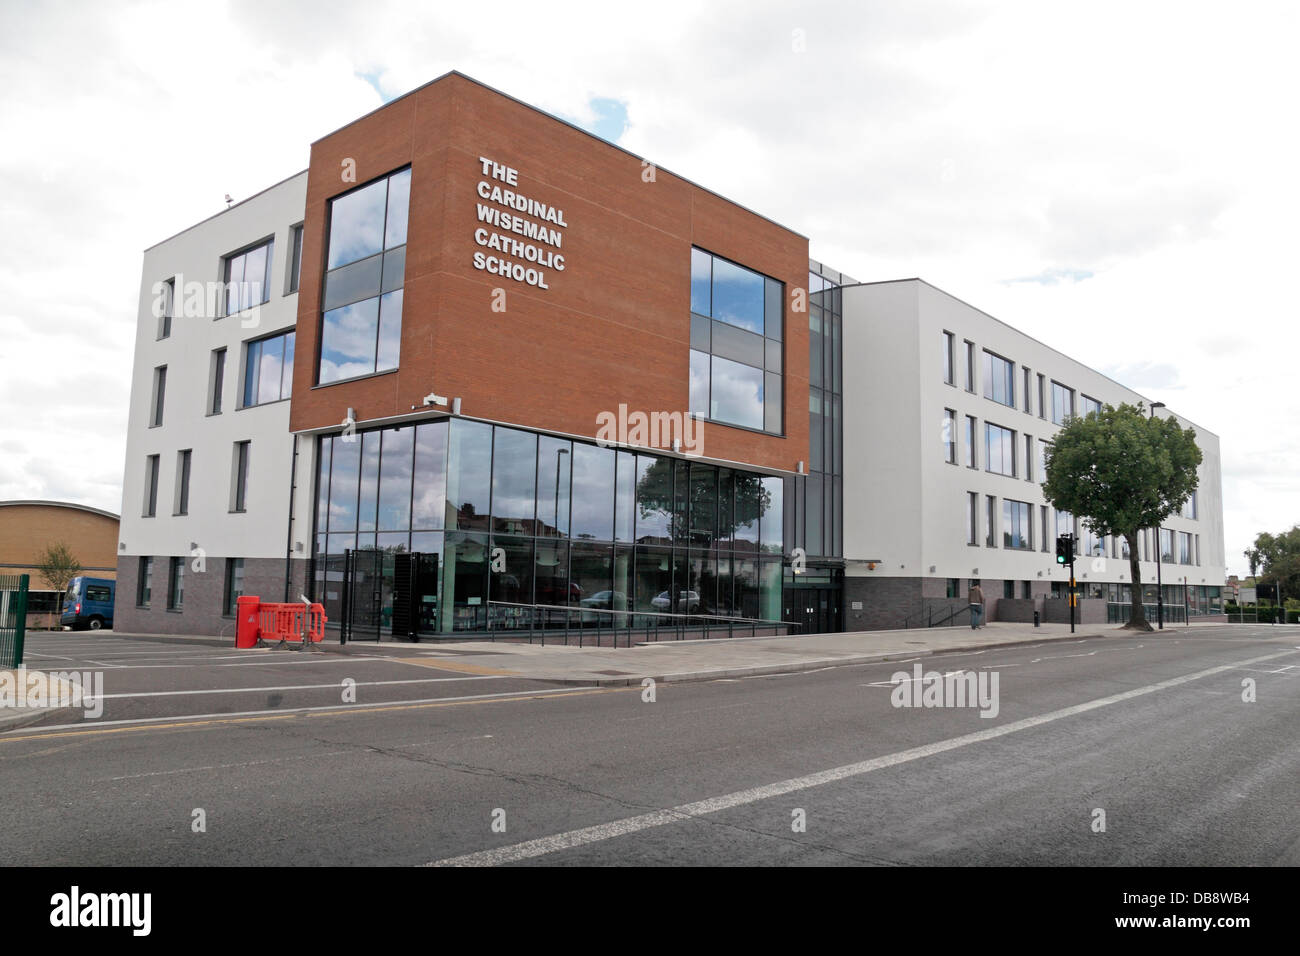 New building (2012) at entrance to Cardinal Wiseman Catholic School in Greenford, Middlesex, UK. Stock Photo